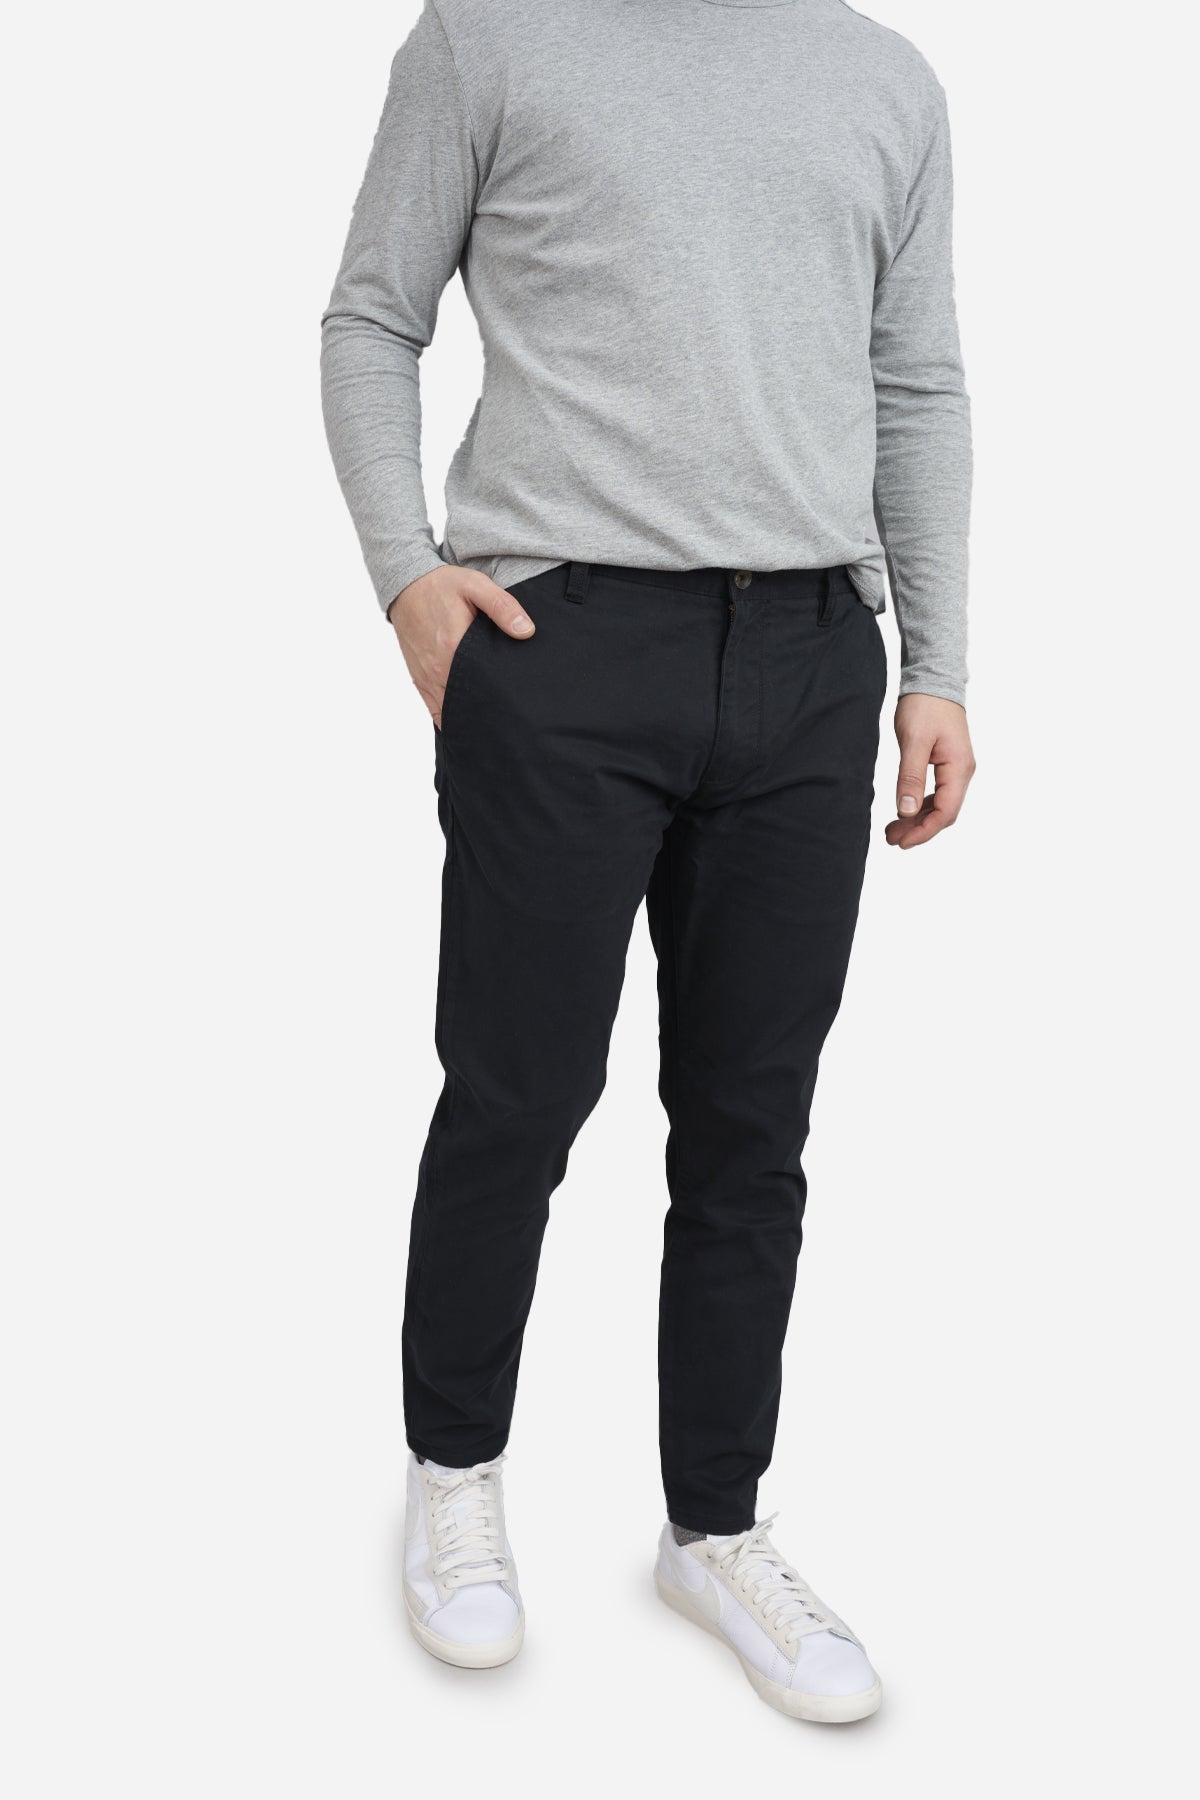 9 Things to Consider When Choosing Chinos – StudioSuits